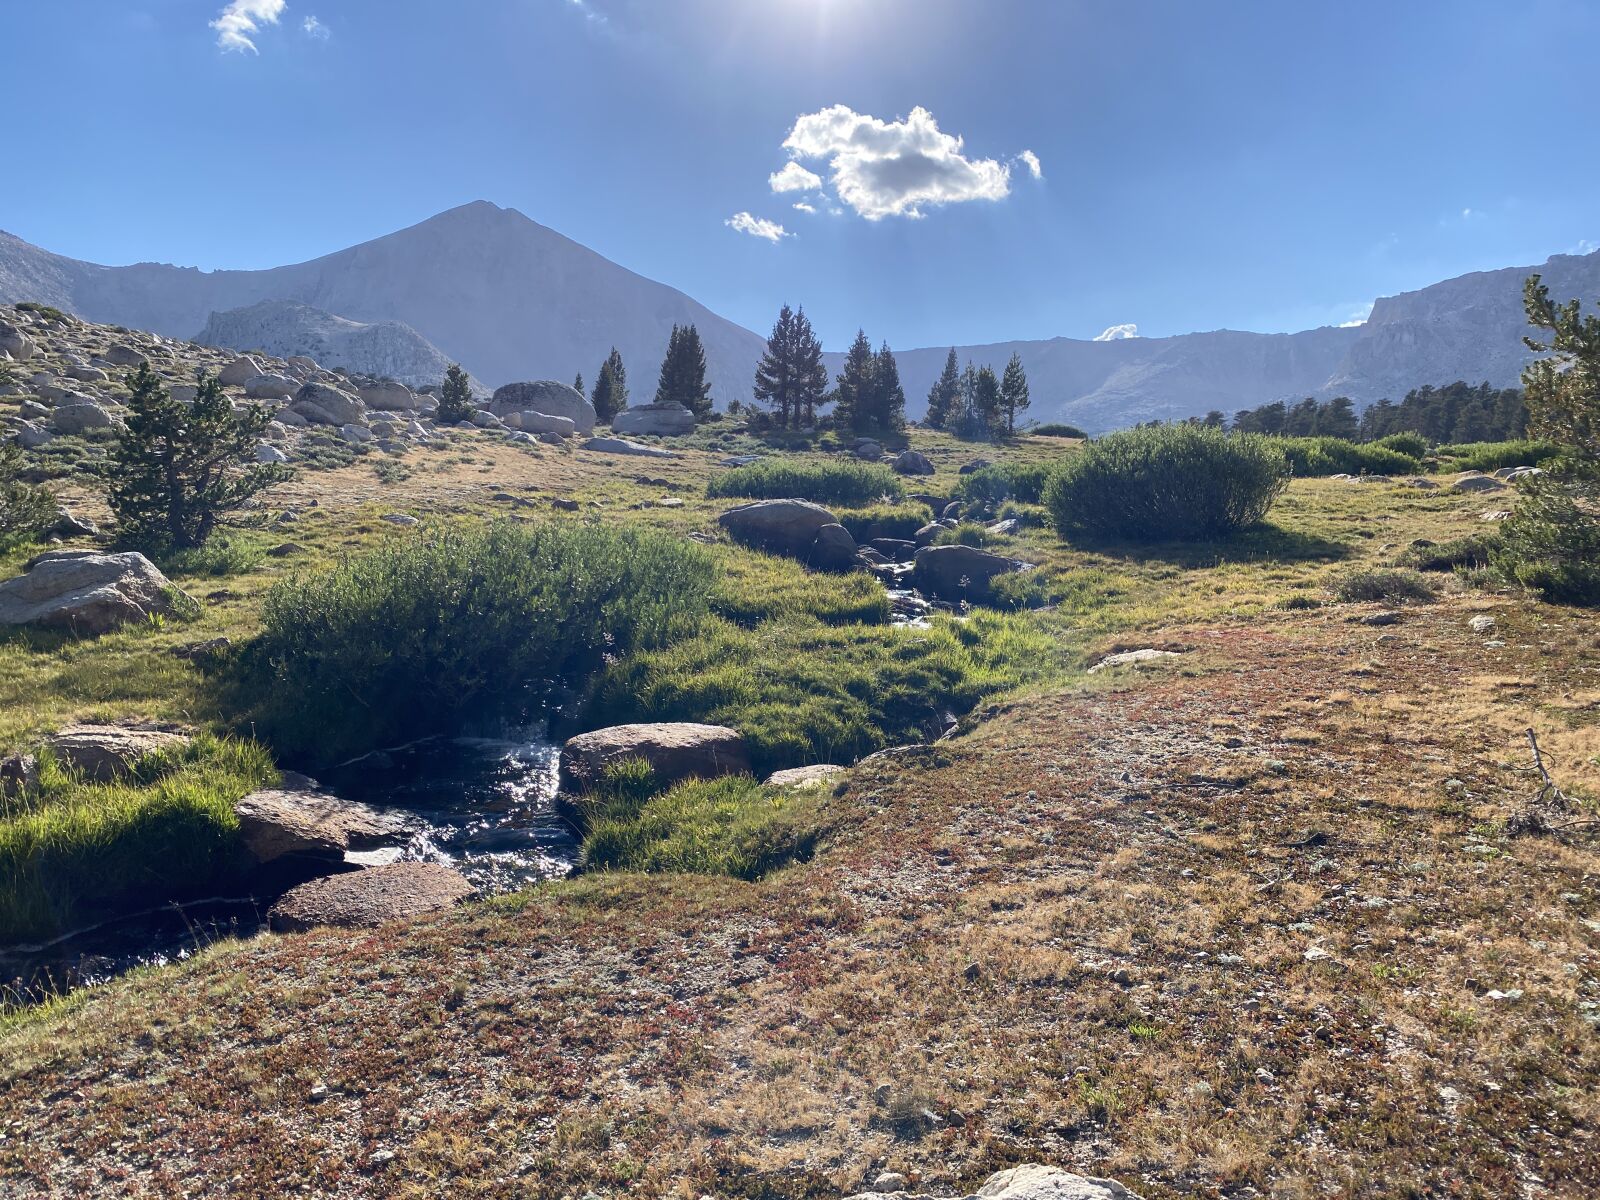 iPhone 11 Pro back triple camera 4.25mm f/1.8 sample photo. Remote wilderness, mountain stream photography